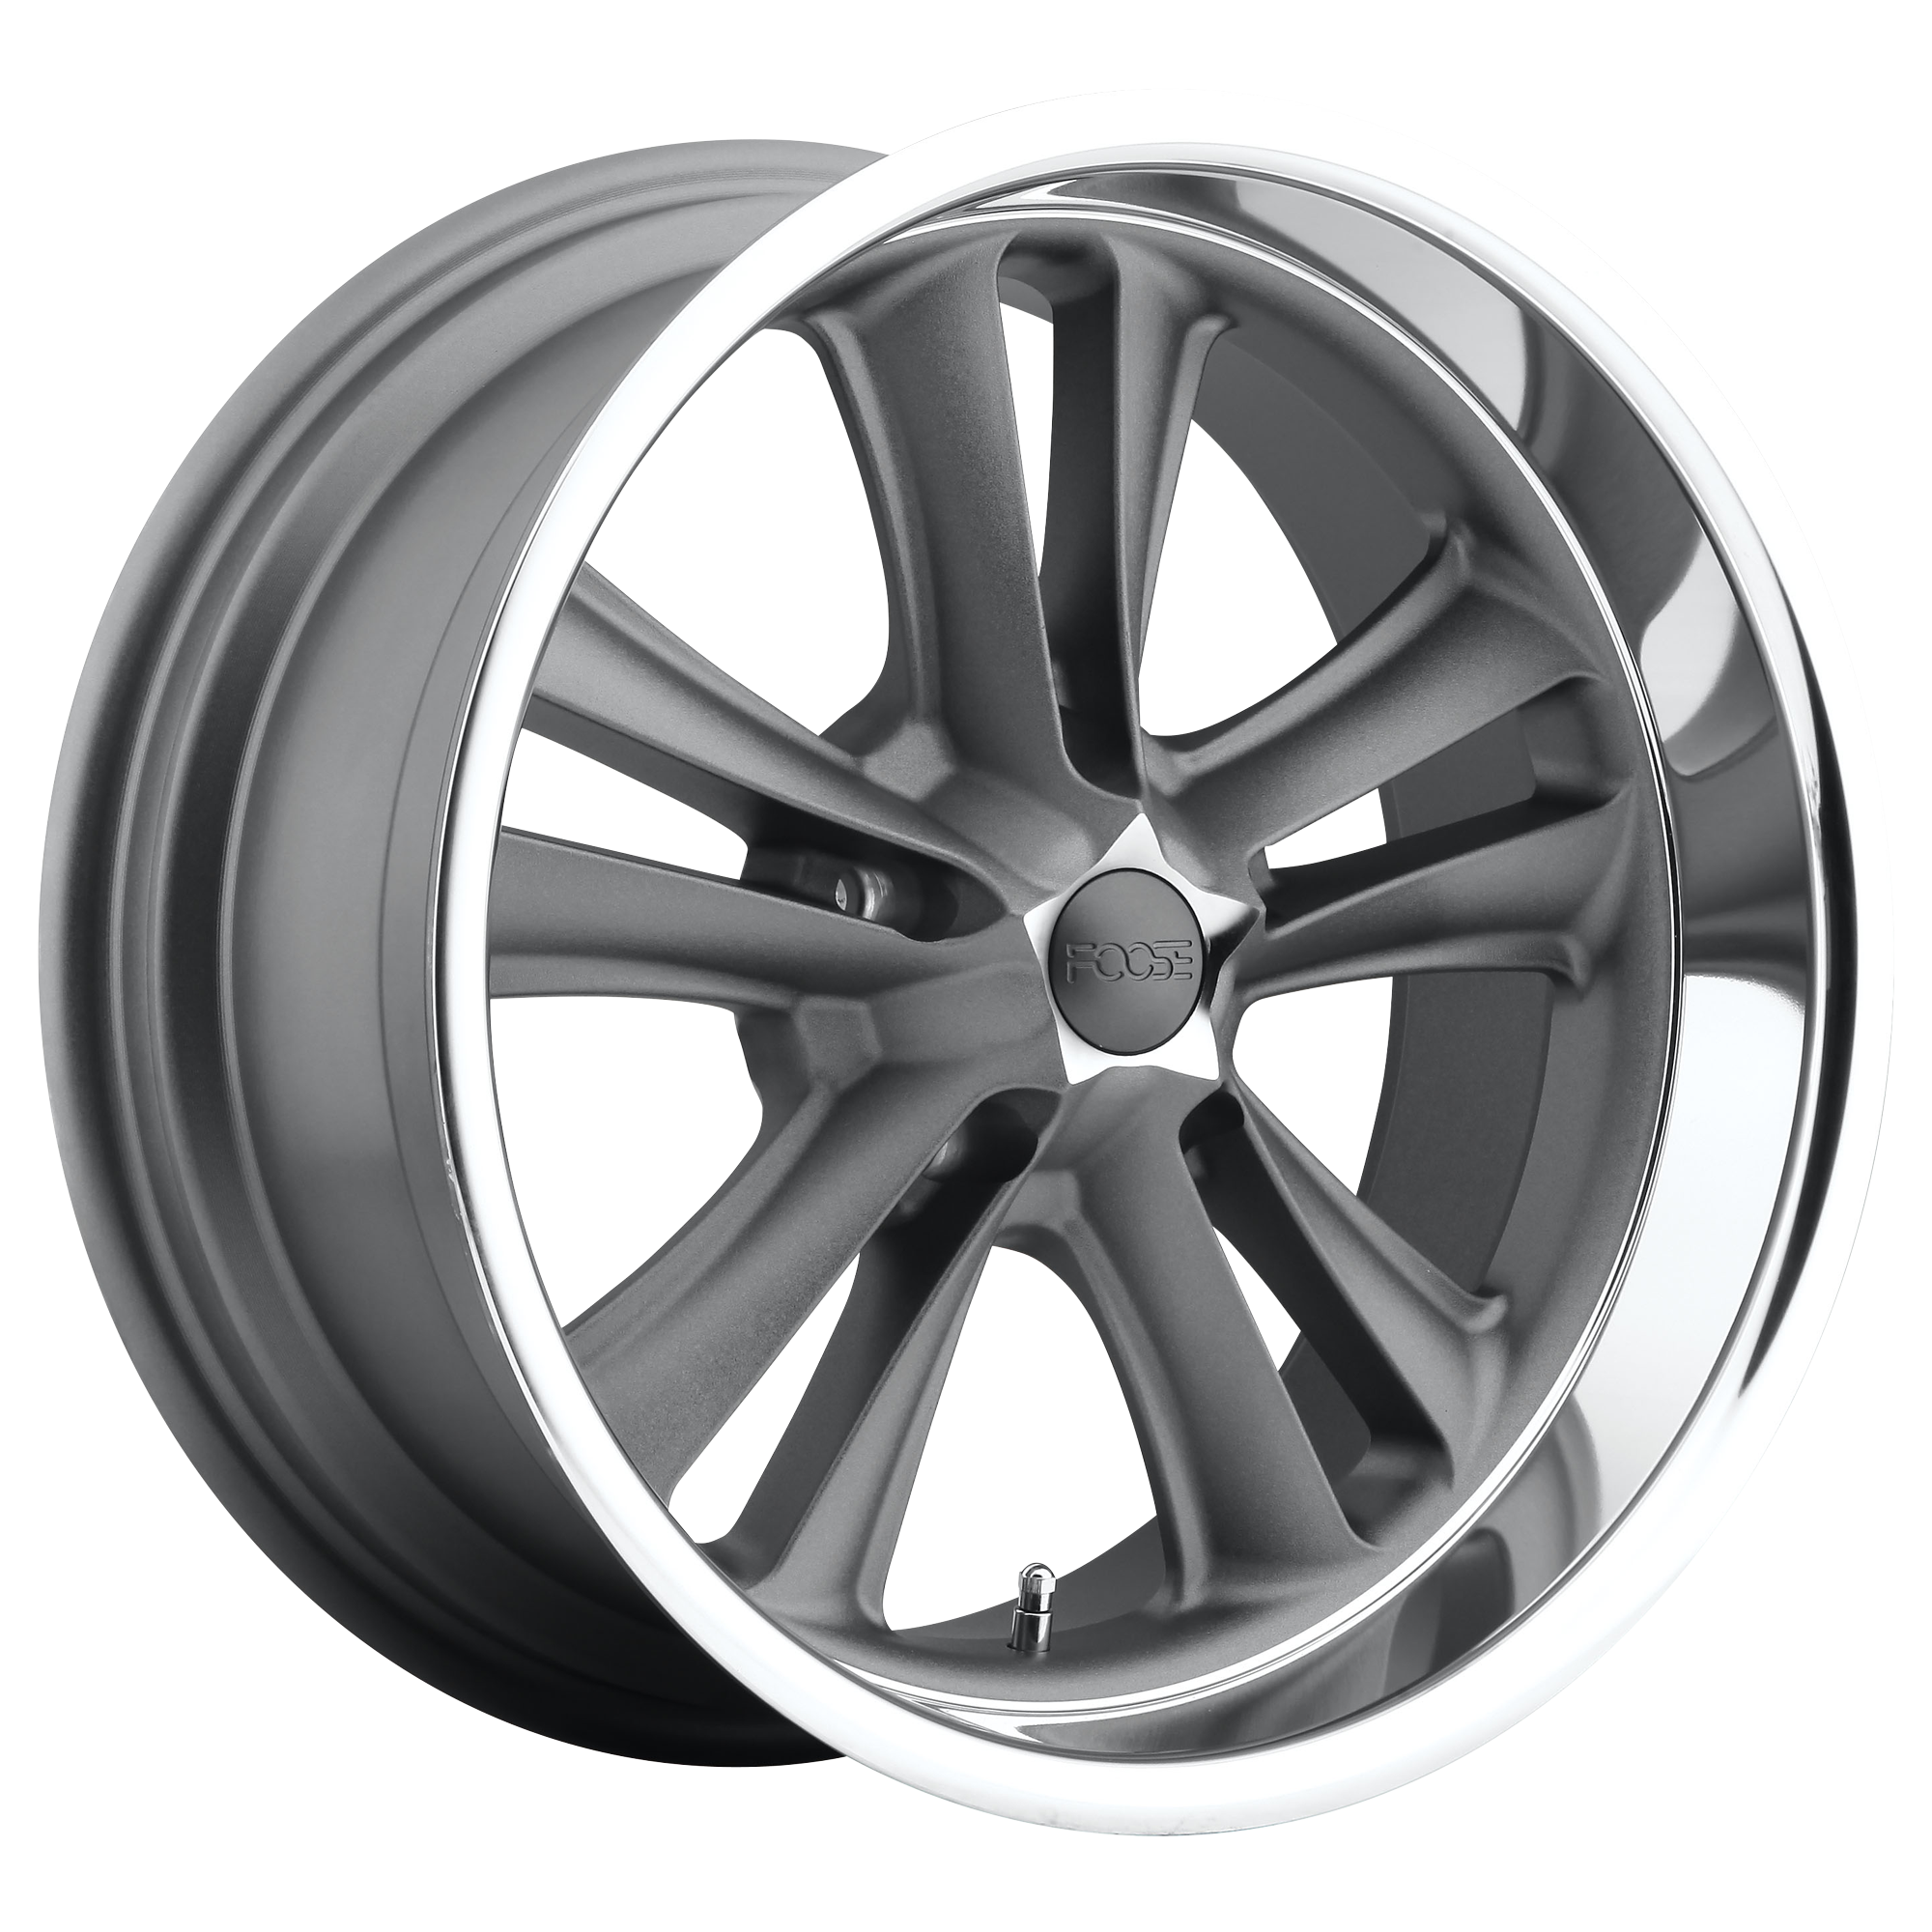 KNUCKLE 17x7 5x120.65 MATTE GUN METAL MACHINED (1 mm) - Tires and Engine Performance